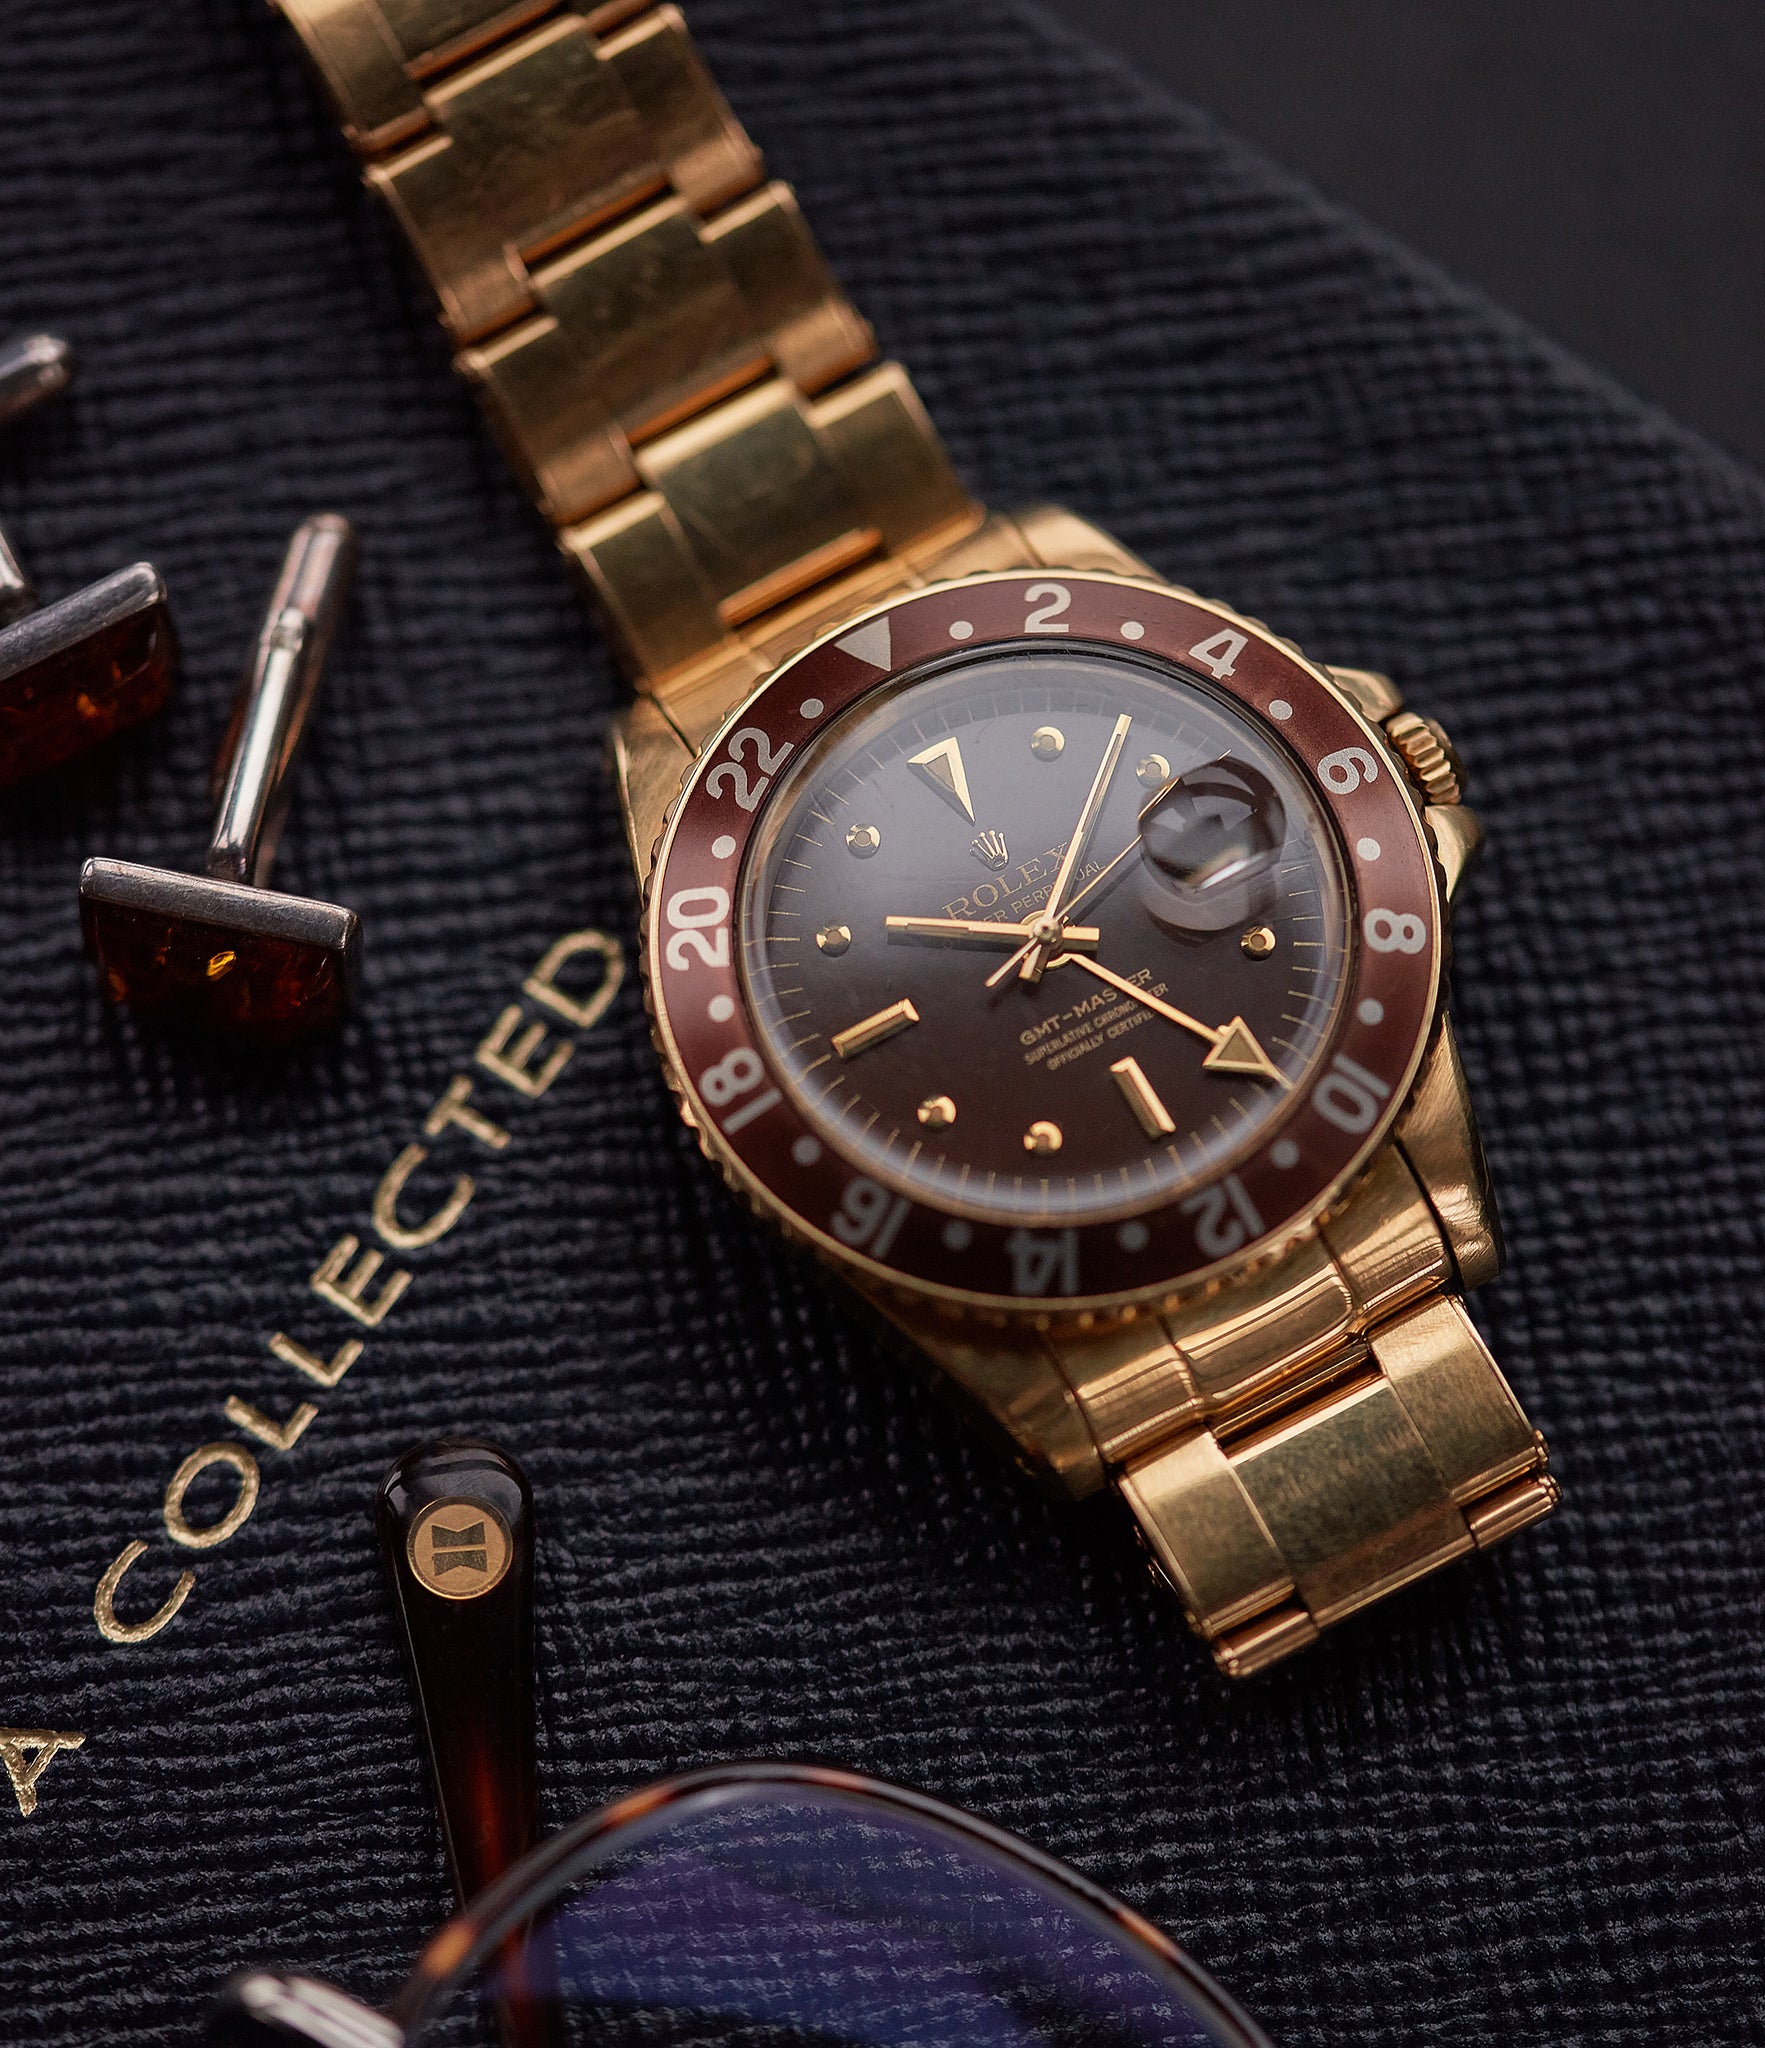 1675 Rolex GMT-Master Concorde yellow gold watch full set for sale online at A Collected Man London UK specialist of rare watches